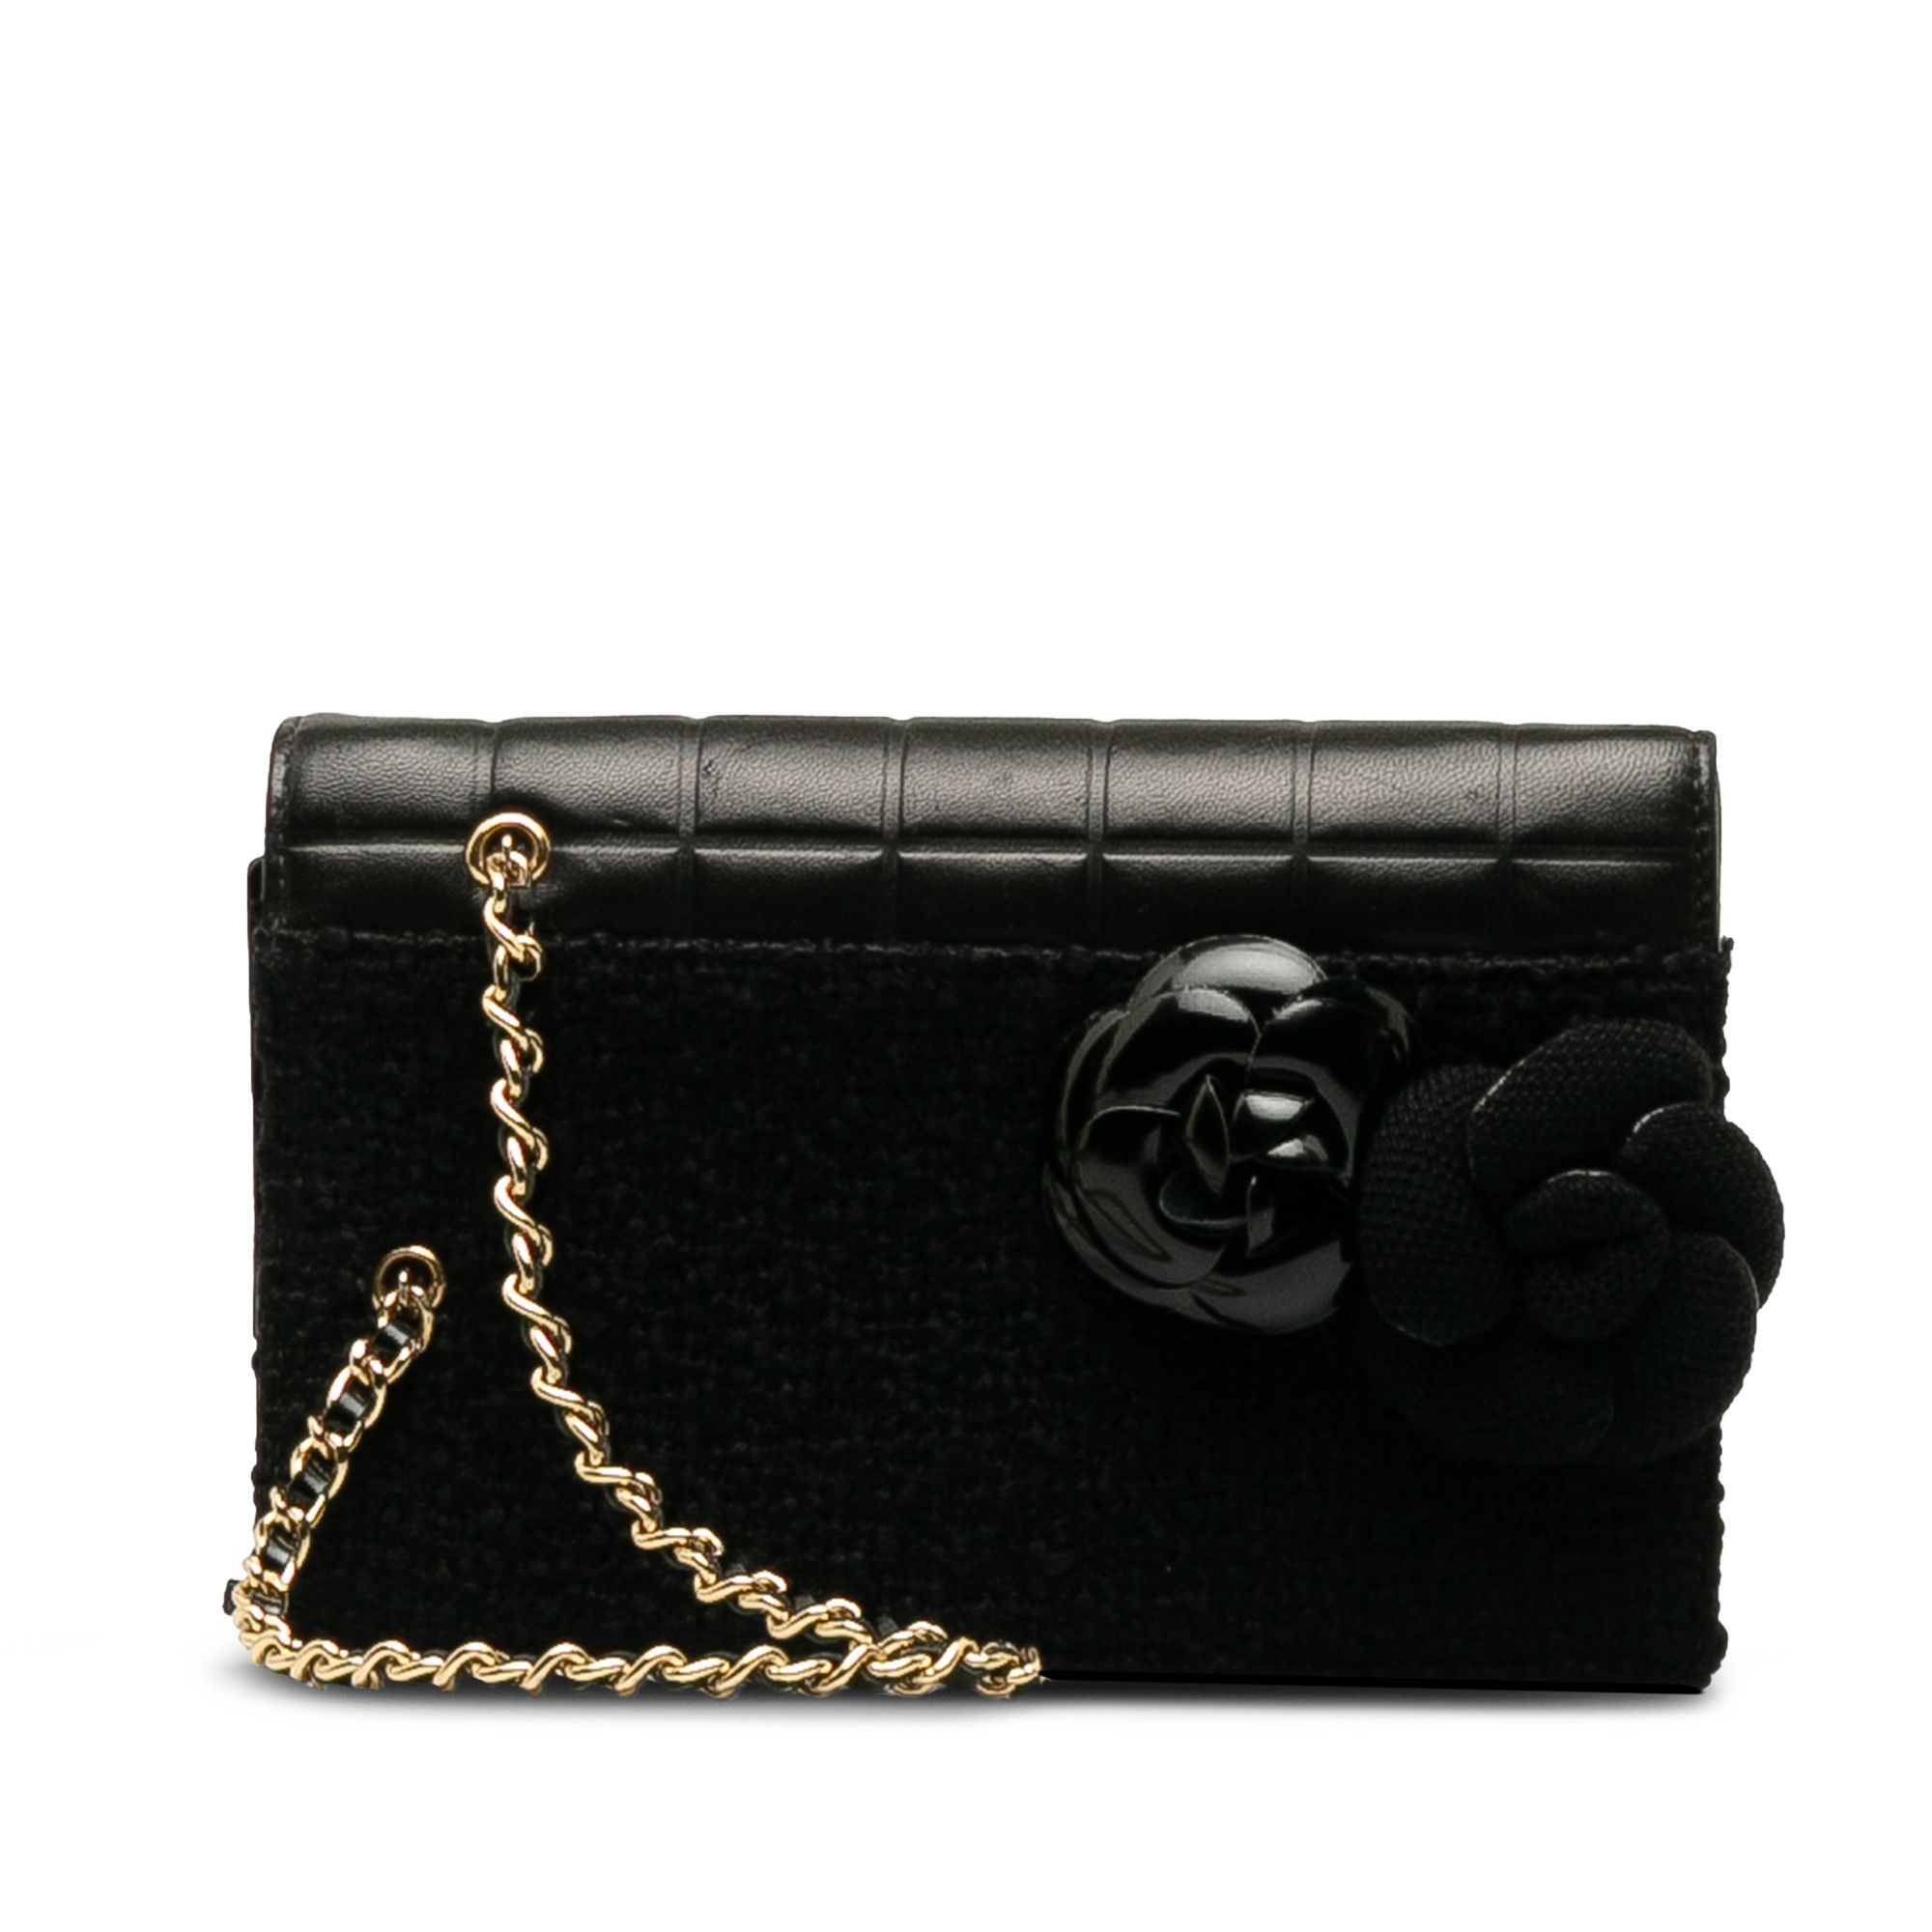 Chanel Chanel Tweed Chocolate Bar Camellia Clutch Size ONE SIZE - 1 Preview